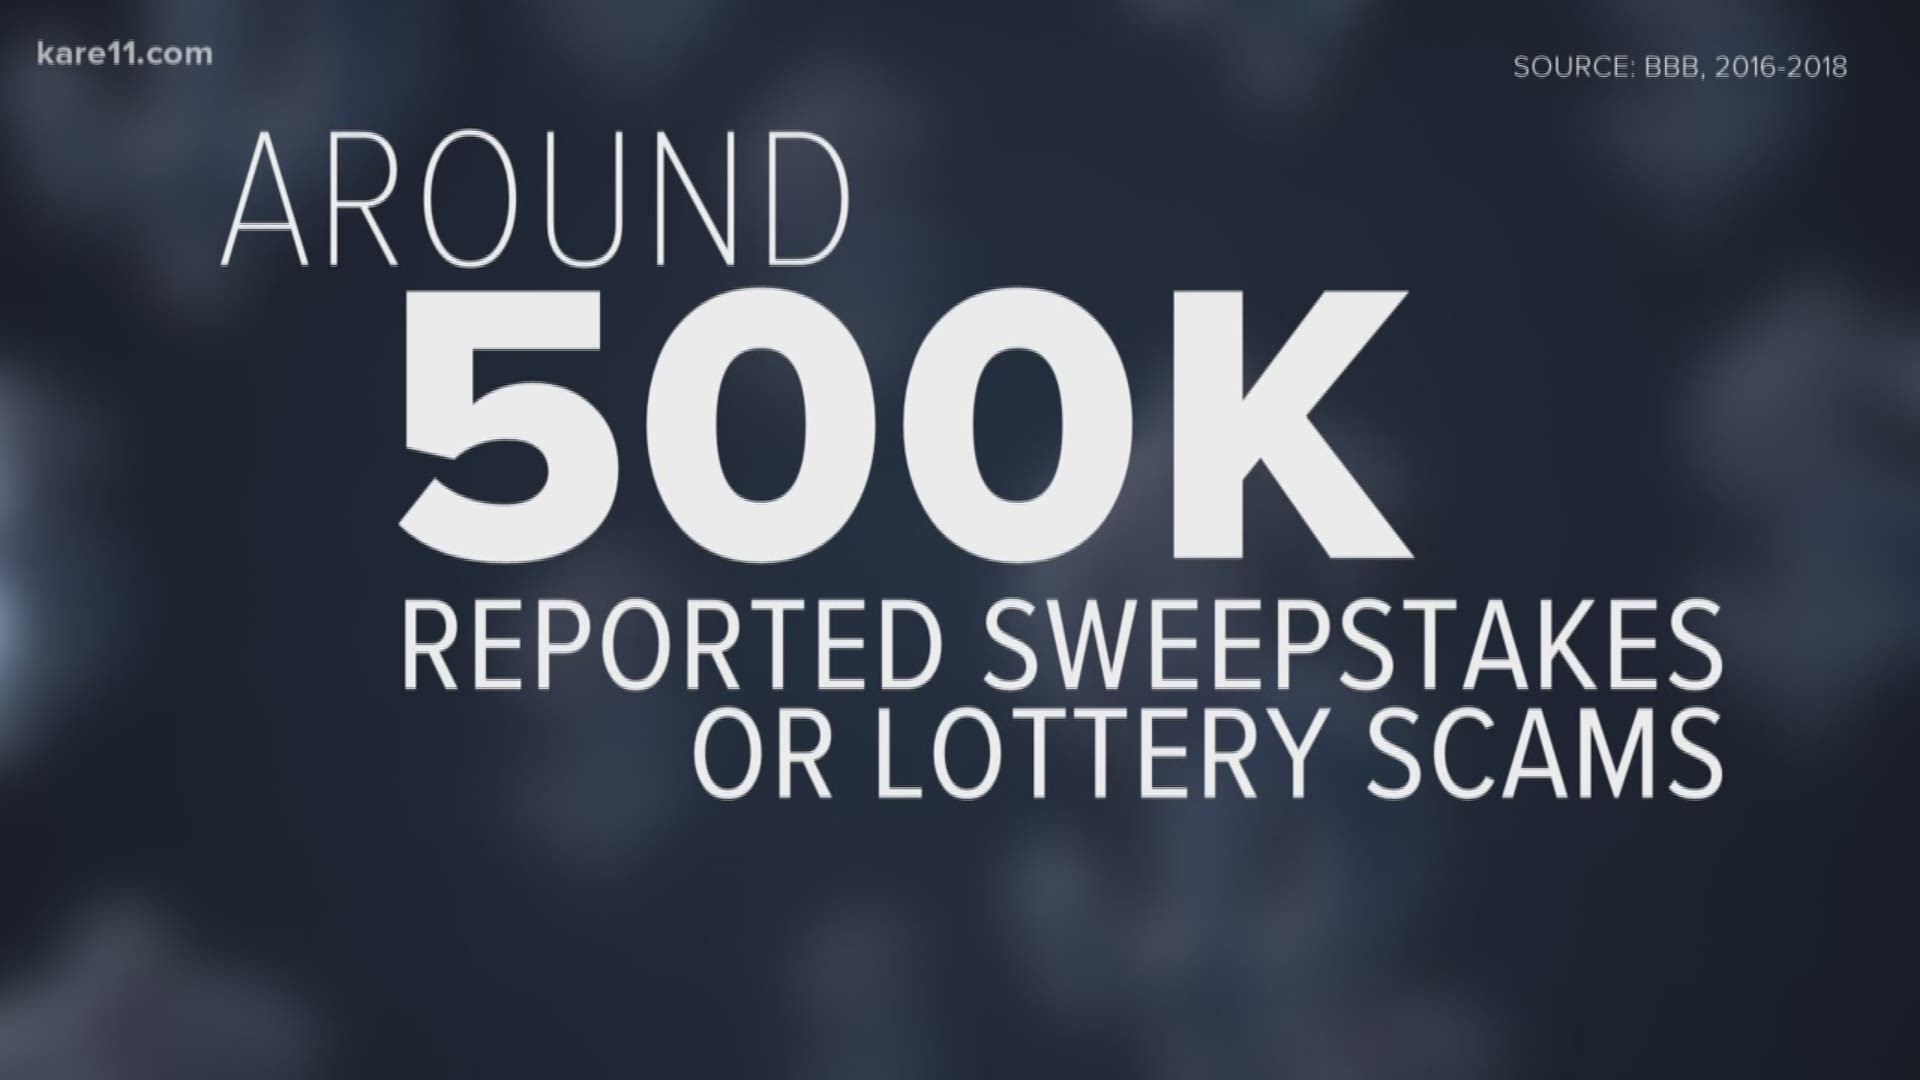 Chaska Police are again warning the public about lottery scams after an elderly woman was nearly tricked into thinking she won the New York Lottery.